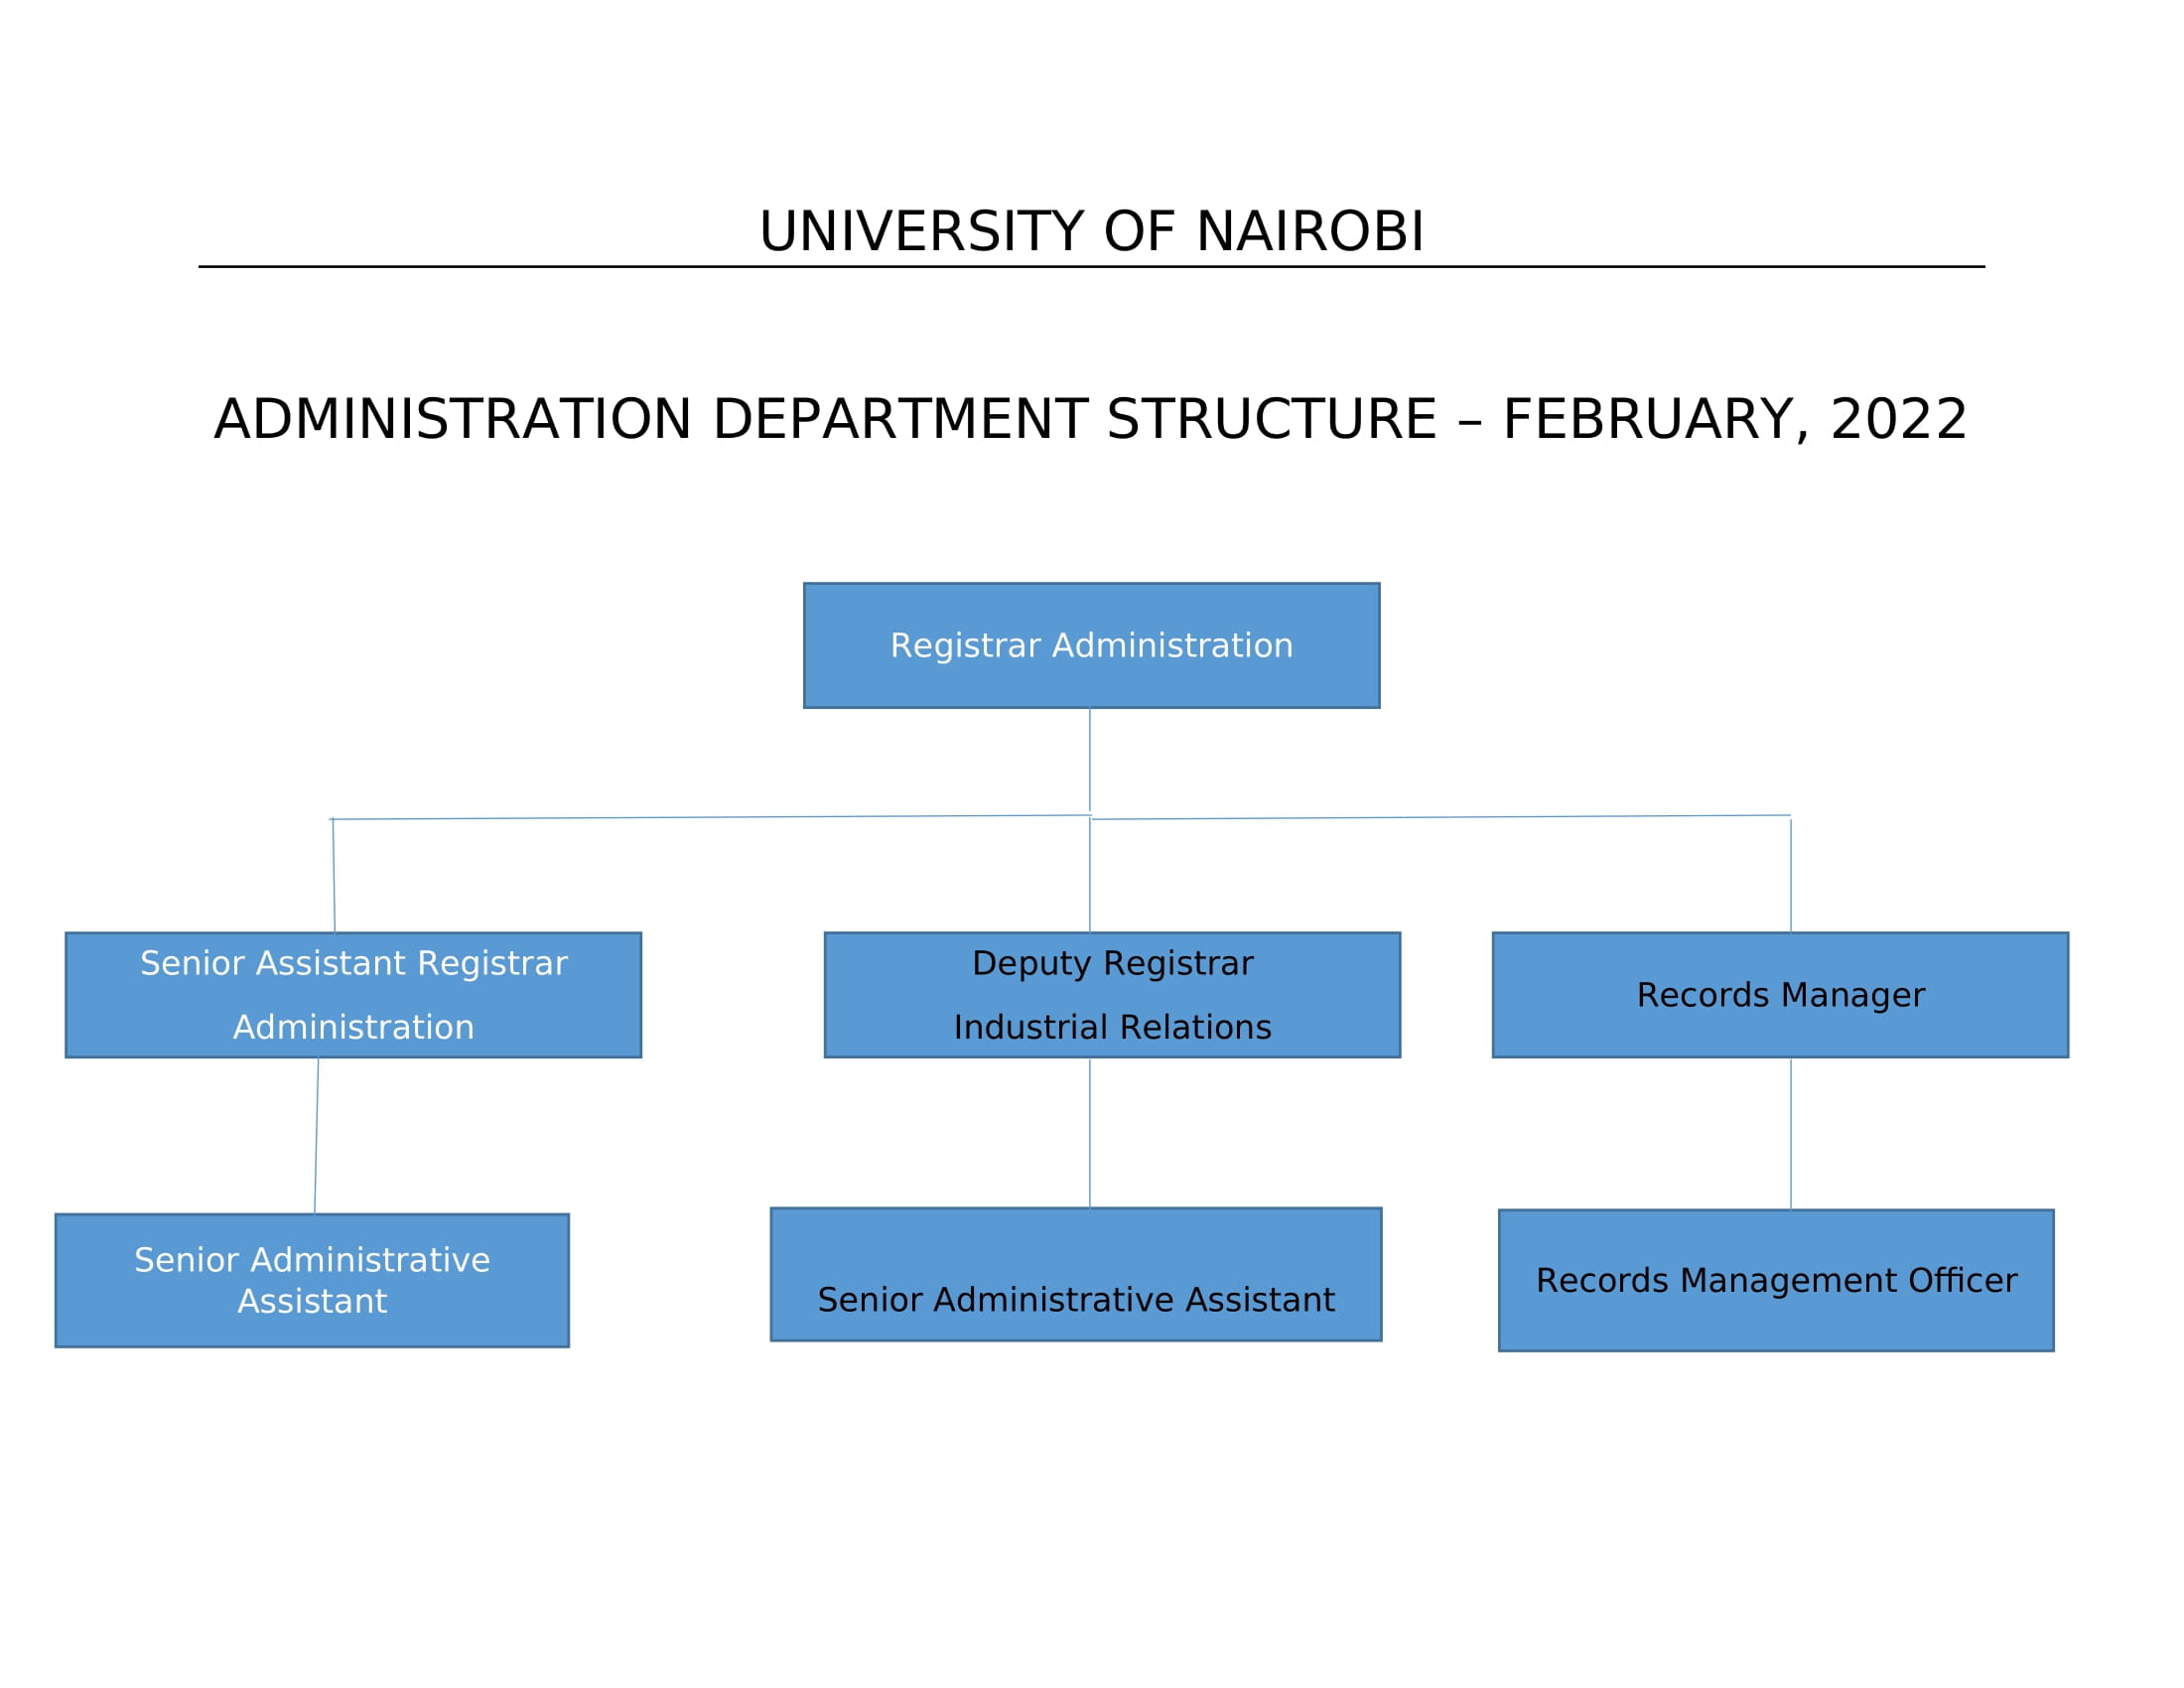 Administration structre